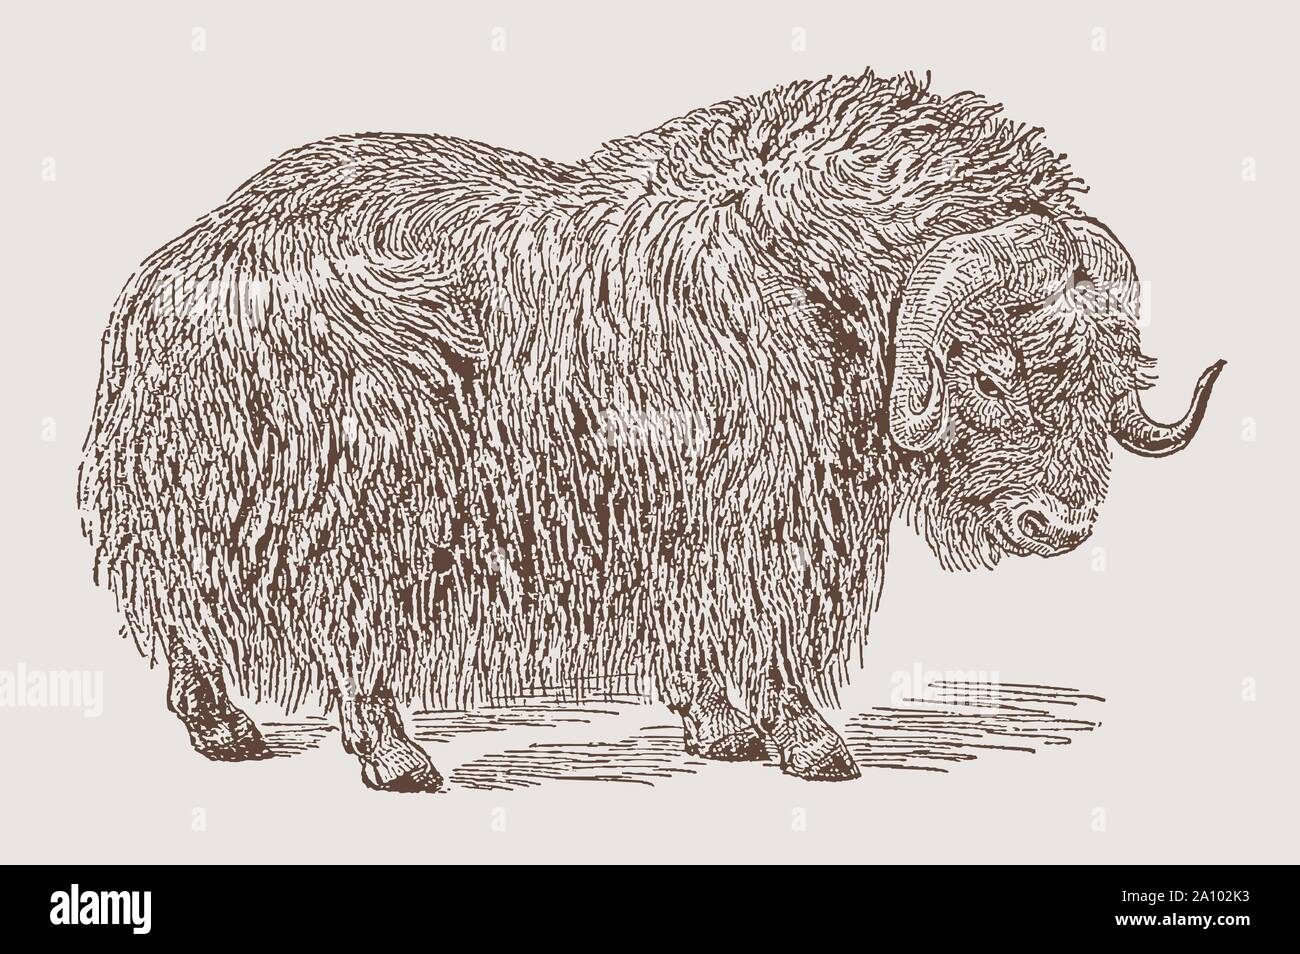 Shaggy musk ox (ovibos moschatus) in side view. Illustration after an engraving from the 19th century Stock Vector